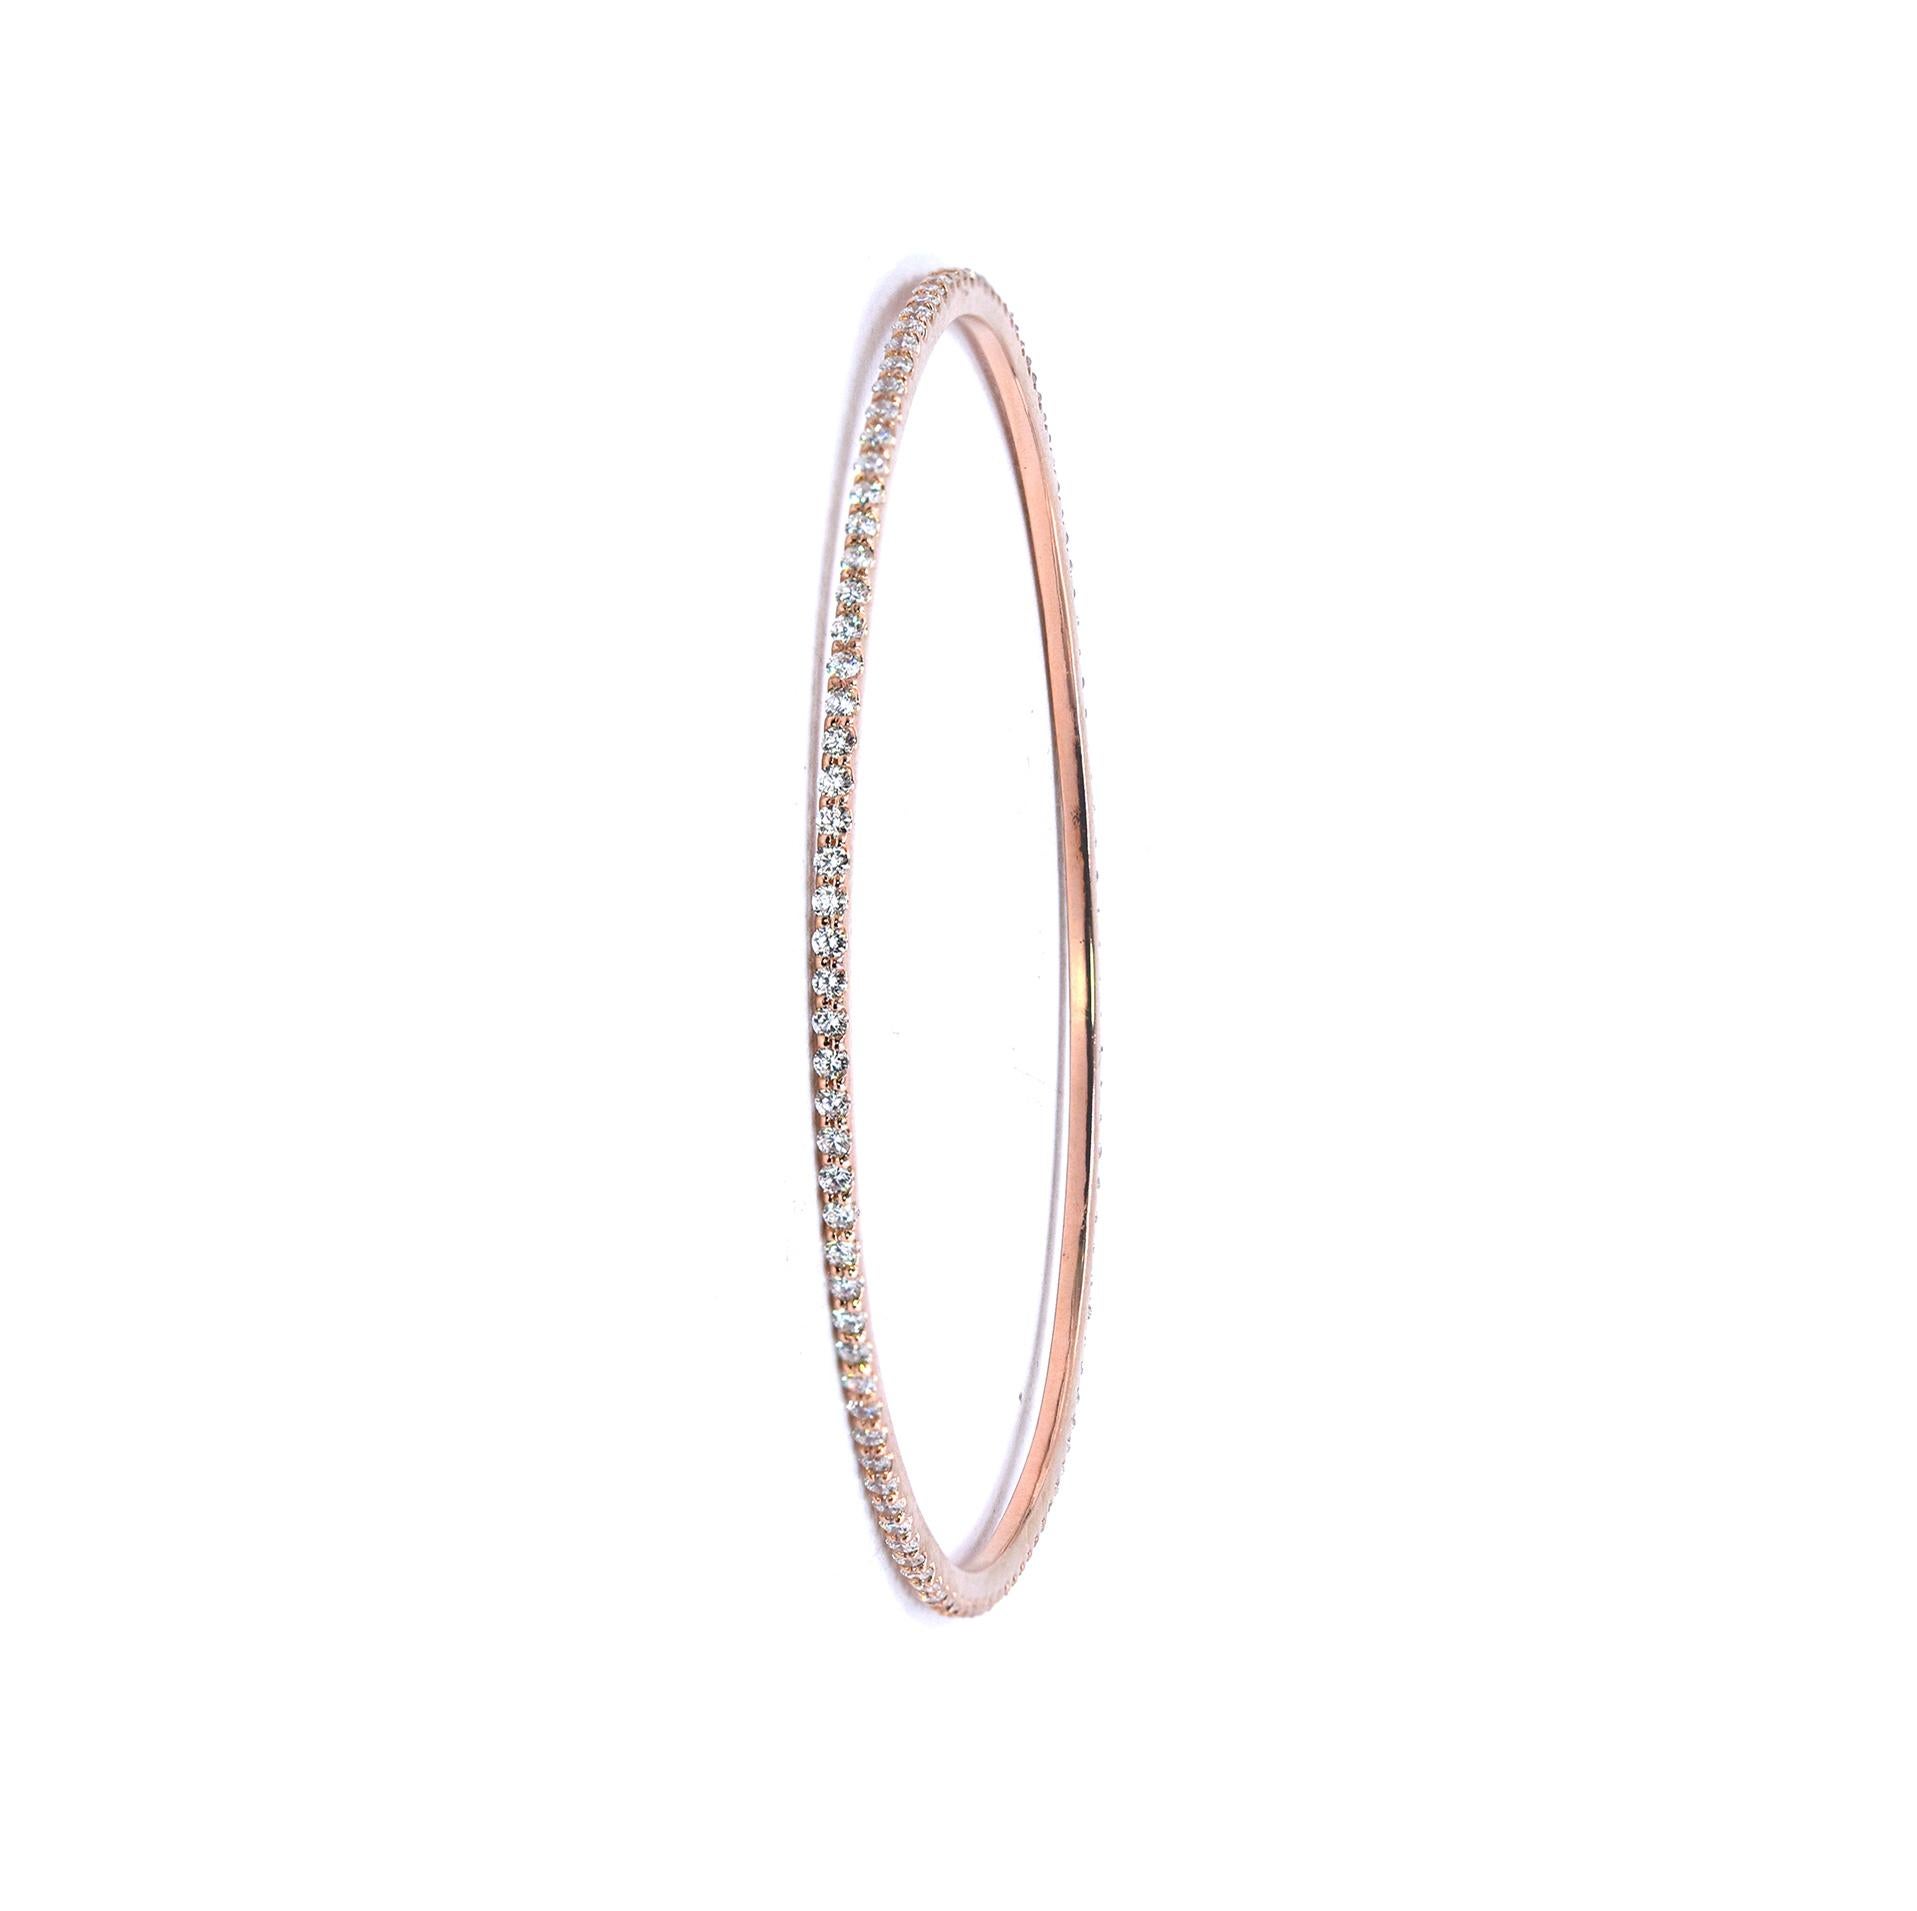 Designer: custom designed 
Material: 14K rose gold
Diamonds: 90 round brilliant cut = 1.80cttw
Color: G
Clarity: VS1
Dimensions: bracelet will fit a 8-inch wrist 
Weight: 7.69grams
